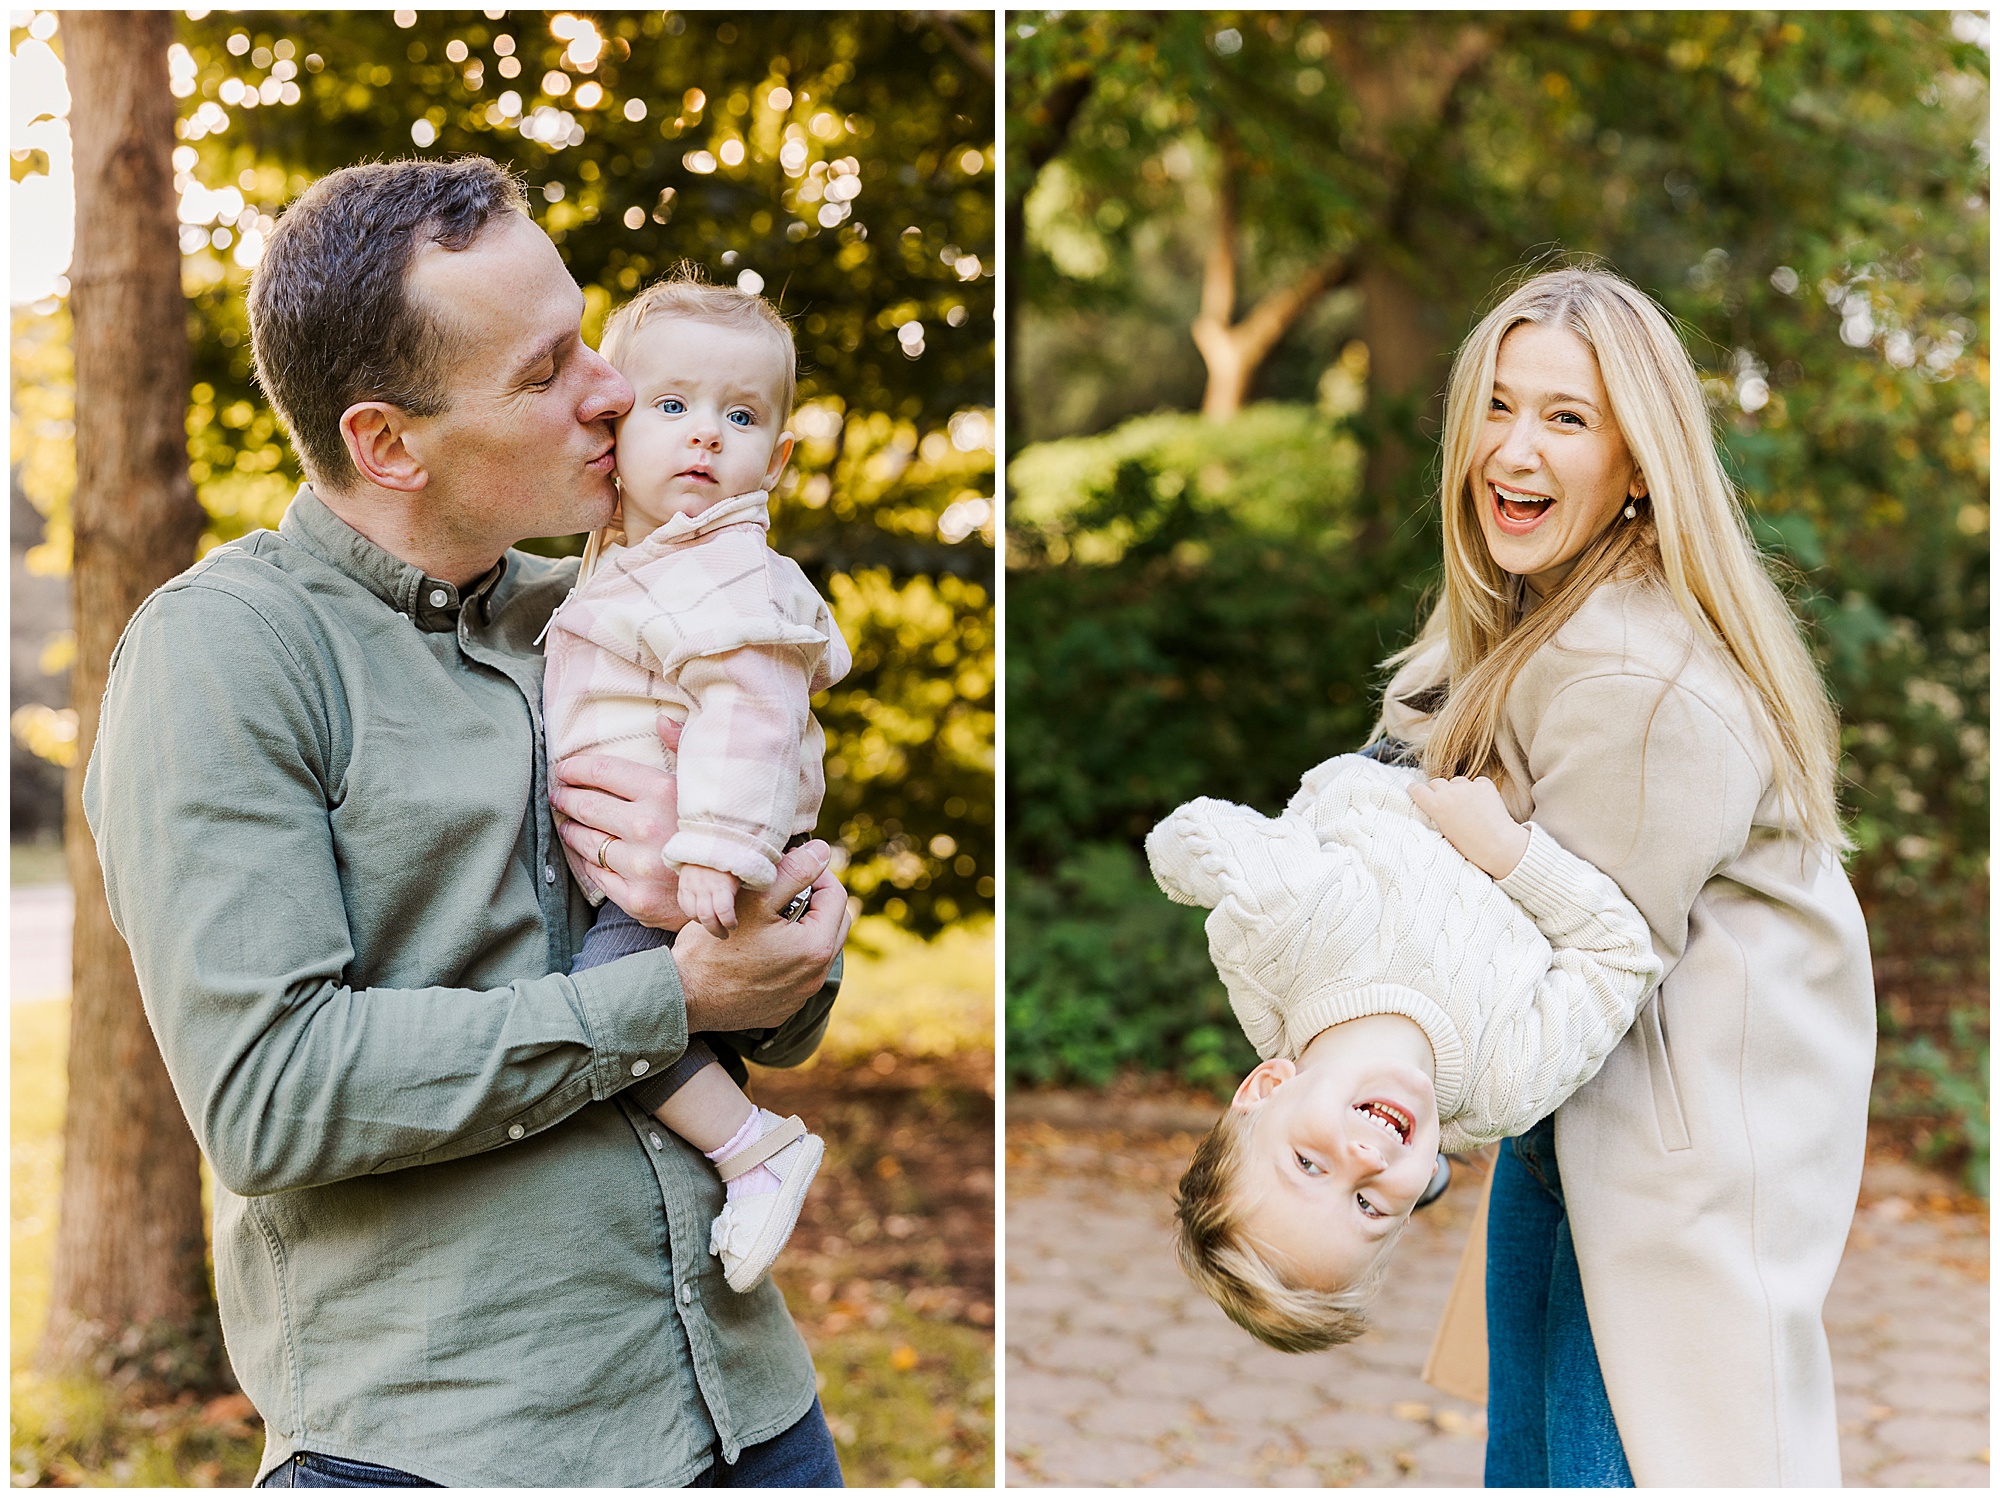 Cheerful family session in Autumn